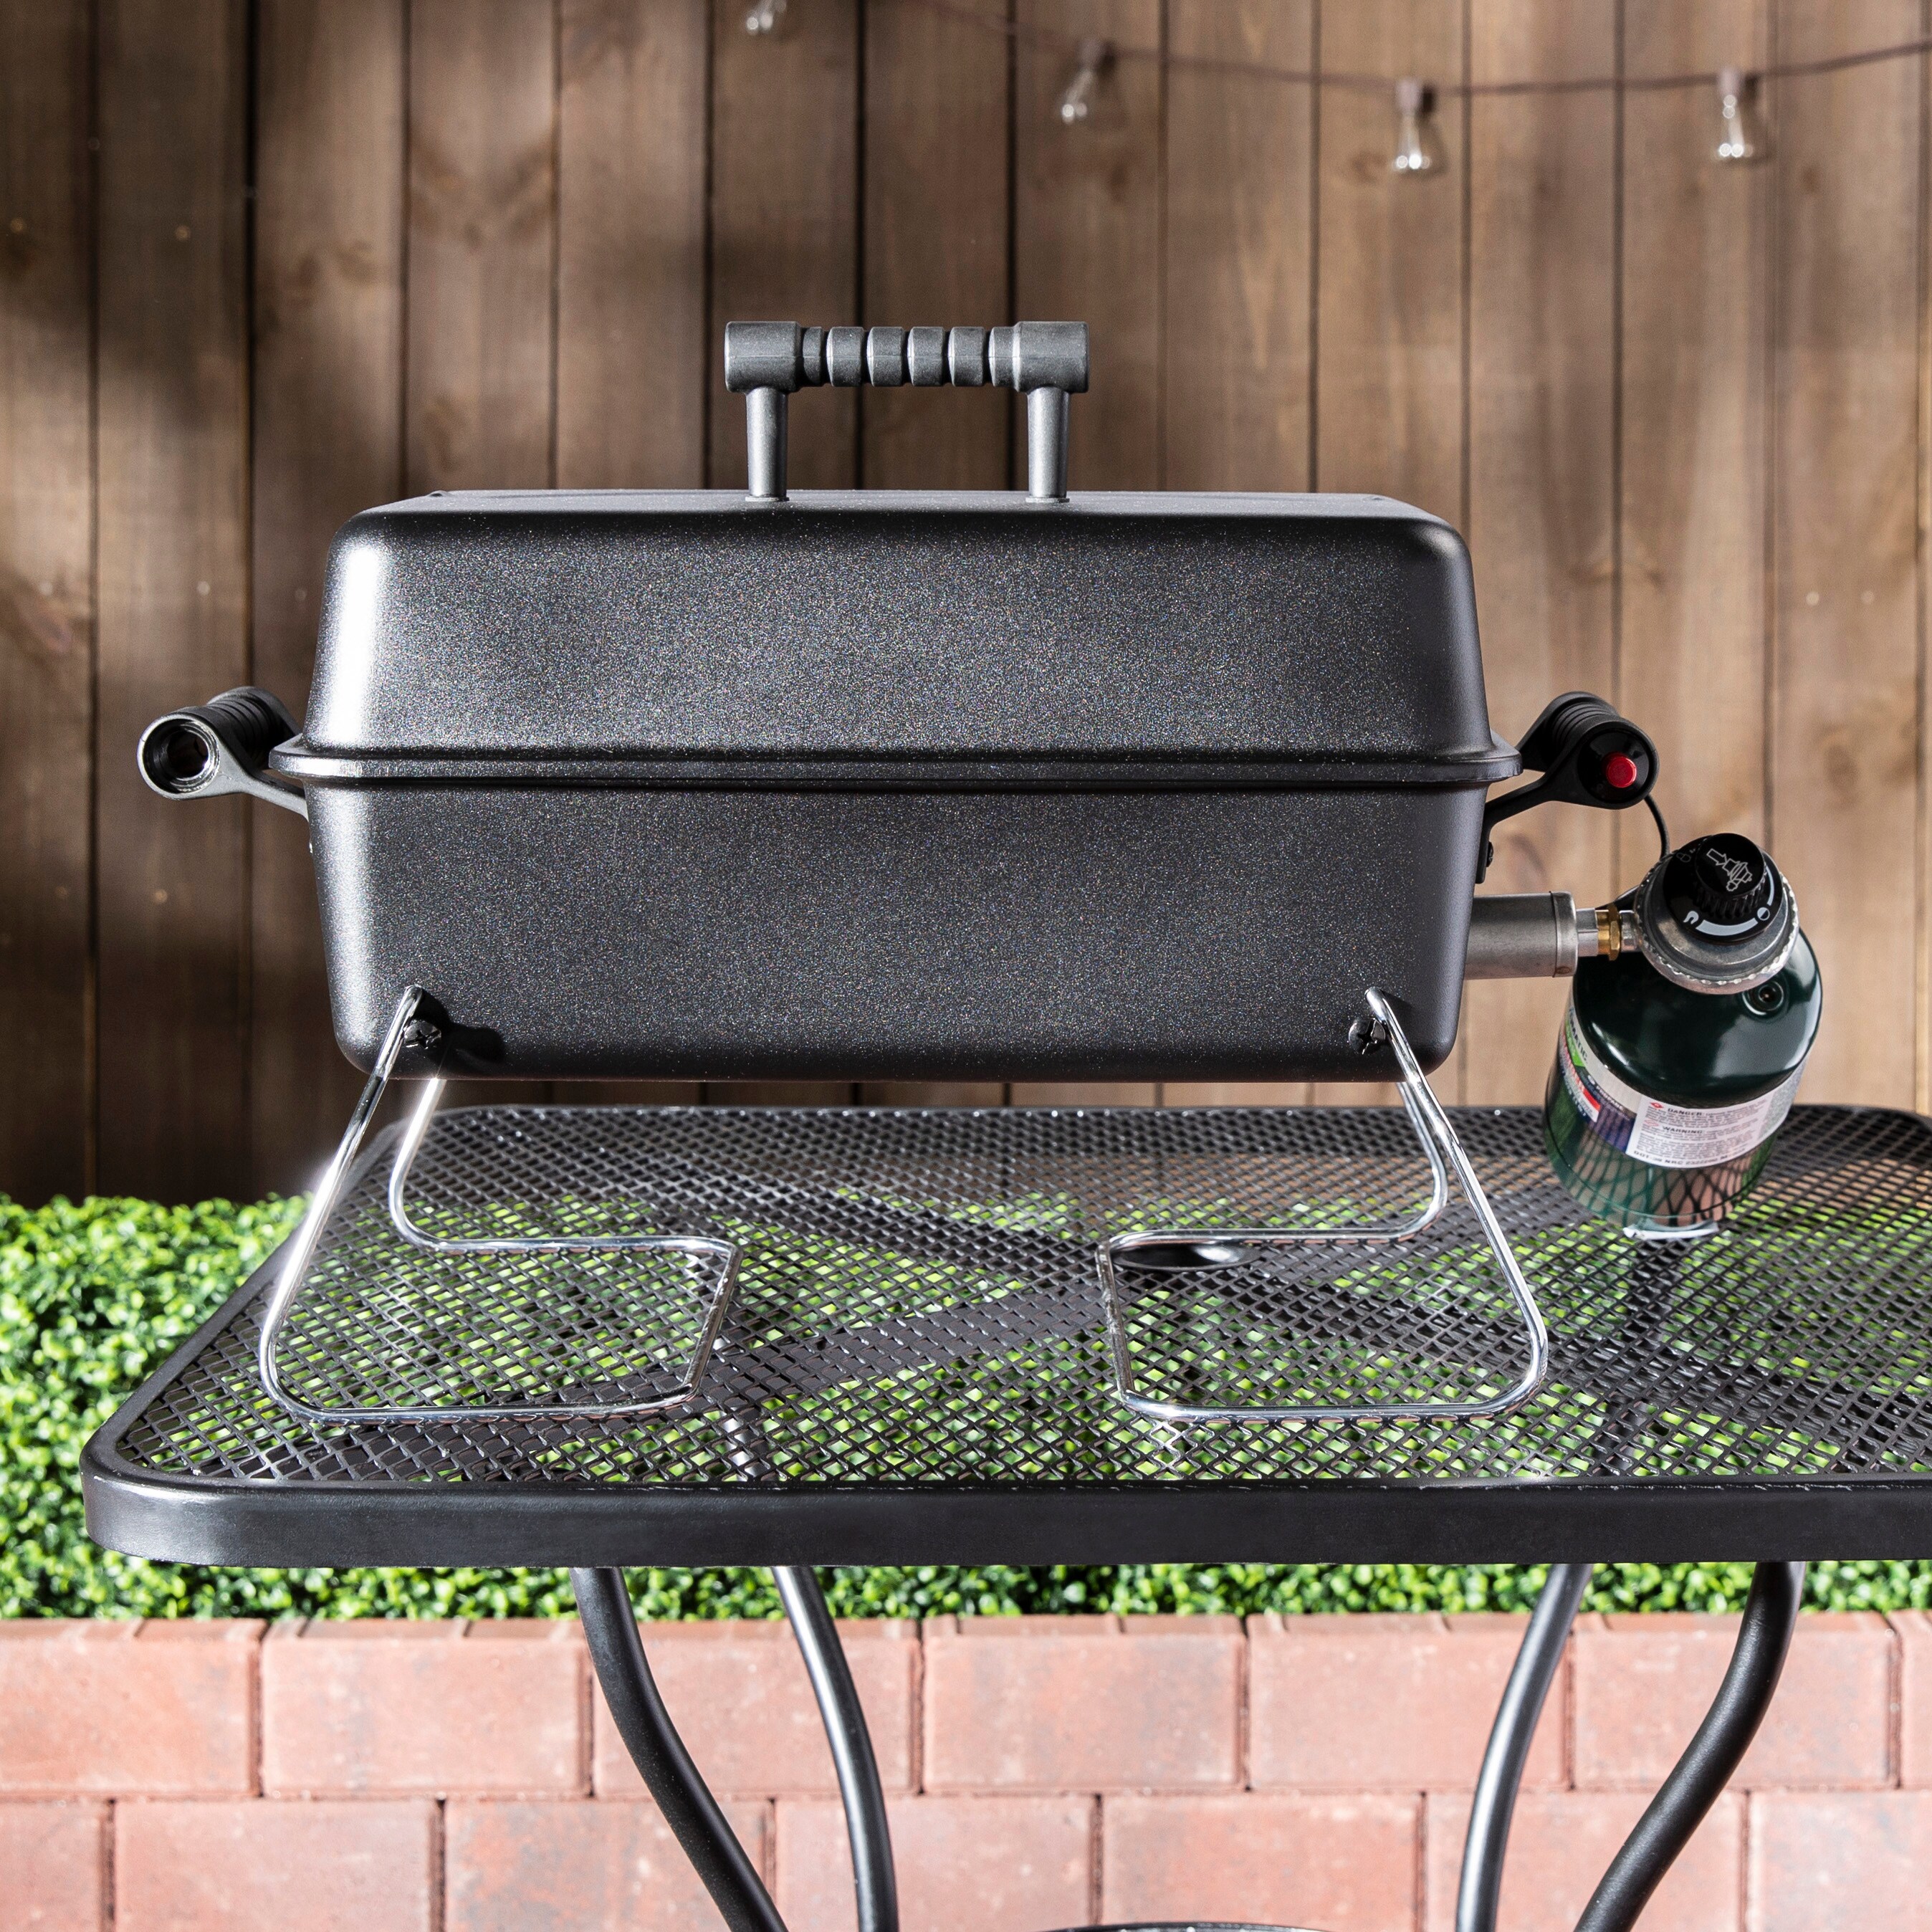 190-Sq in Black Portable Gas Grill in Portable Grills department at Lowes.com